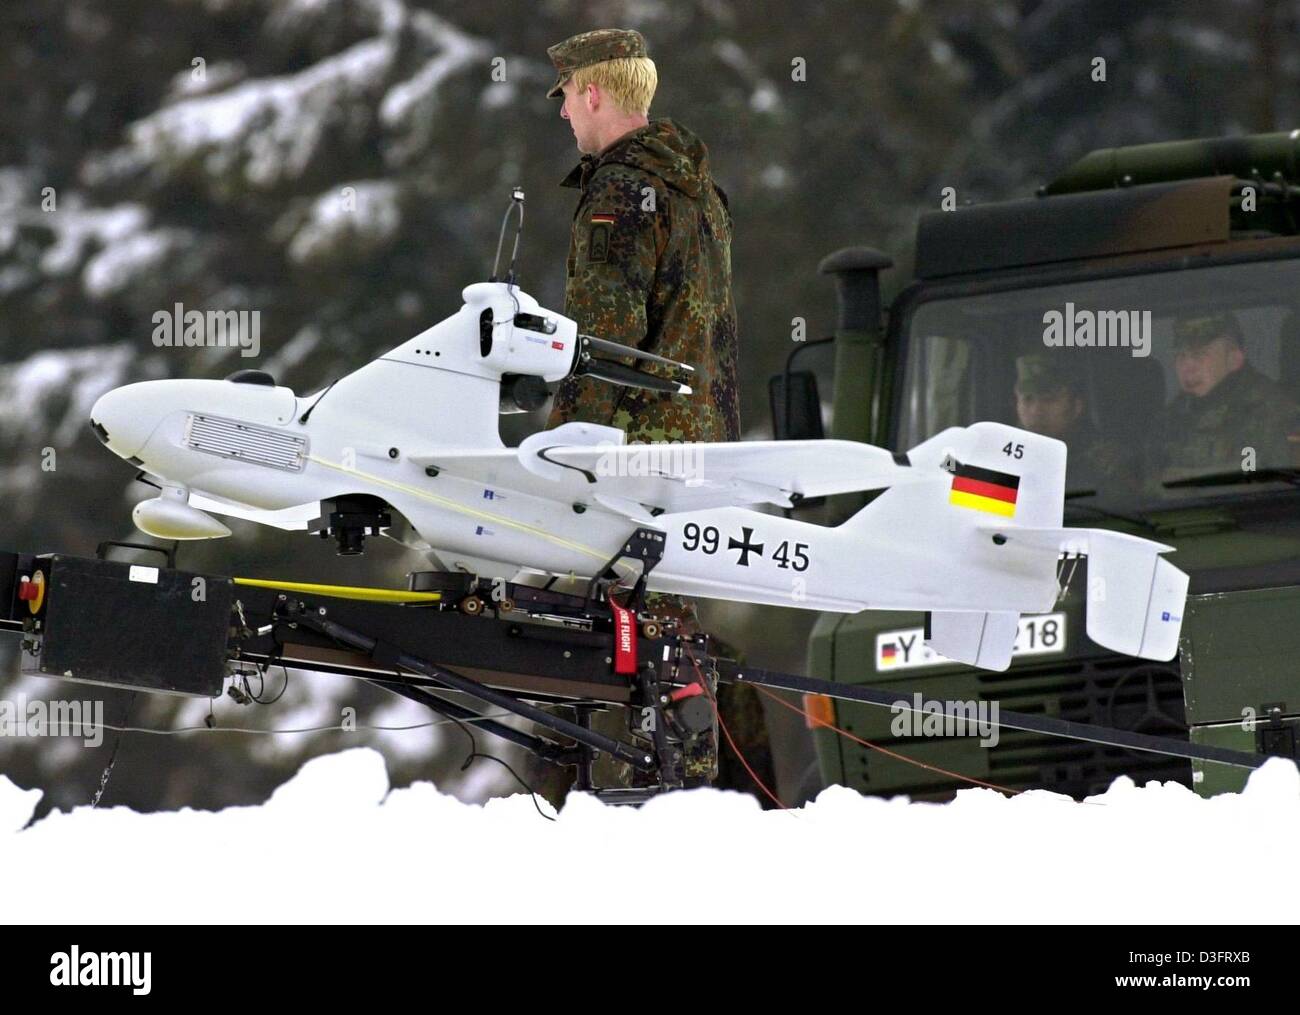 (dpa) - A soldier stands behind a Luna surveillance drone on the ground station of a military training area near Murnau, Germany, 11 February 2003. The Luna drone starts with a catapult take-off. It can be operated via an autopilot system and can film and send videos from a short distance without jeopardizing the lives of soldiers. The Luna drone was requested by the UN weapon insp Stock Photo